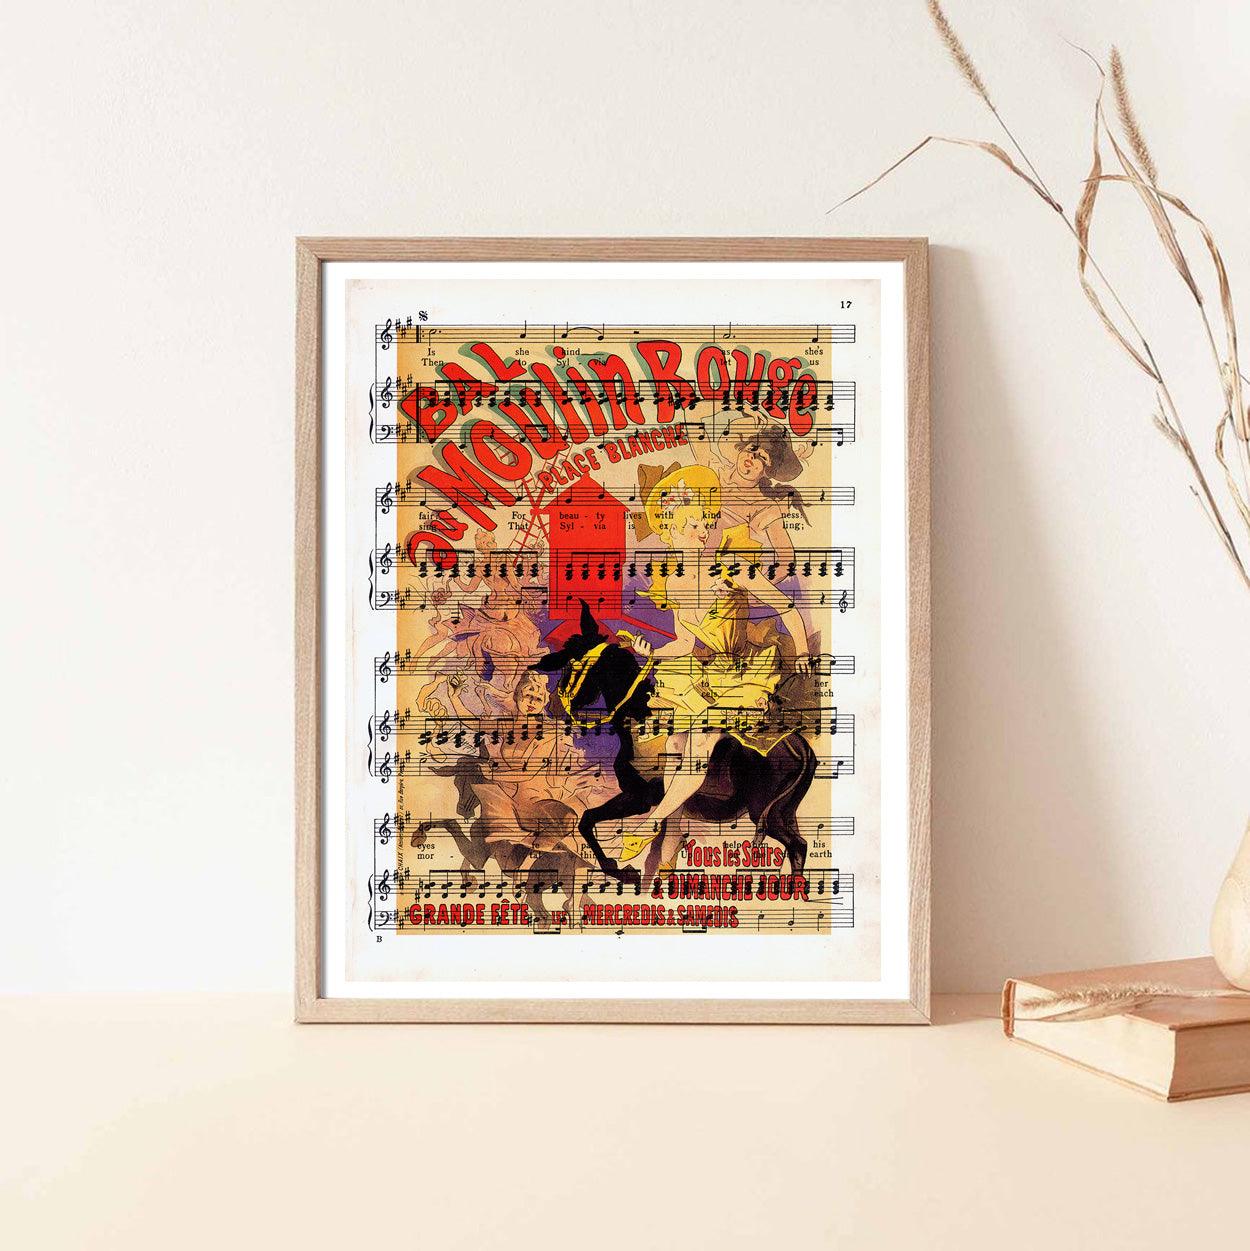 Give your home decor a touch of elegance through our exquisite Bal au Moulin Rouge reproduction poster. The artwork is a collage with the theatrical poster's design by Jules Chéret (French graphic designer, 1836-1932). Year of created 1889.